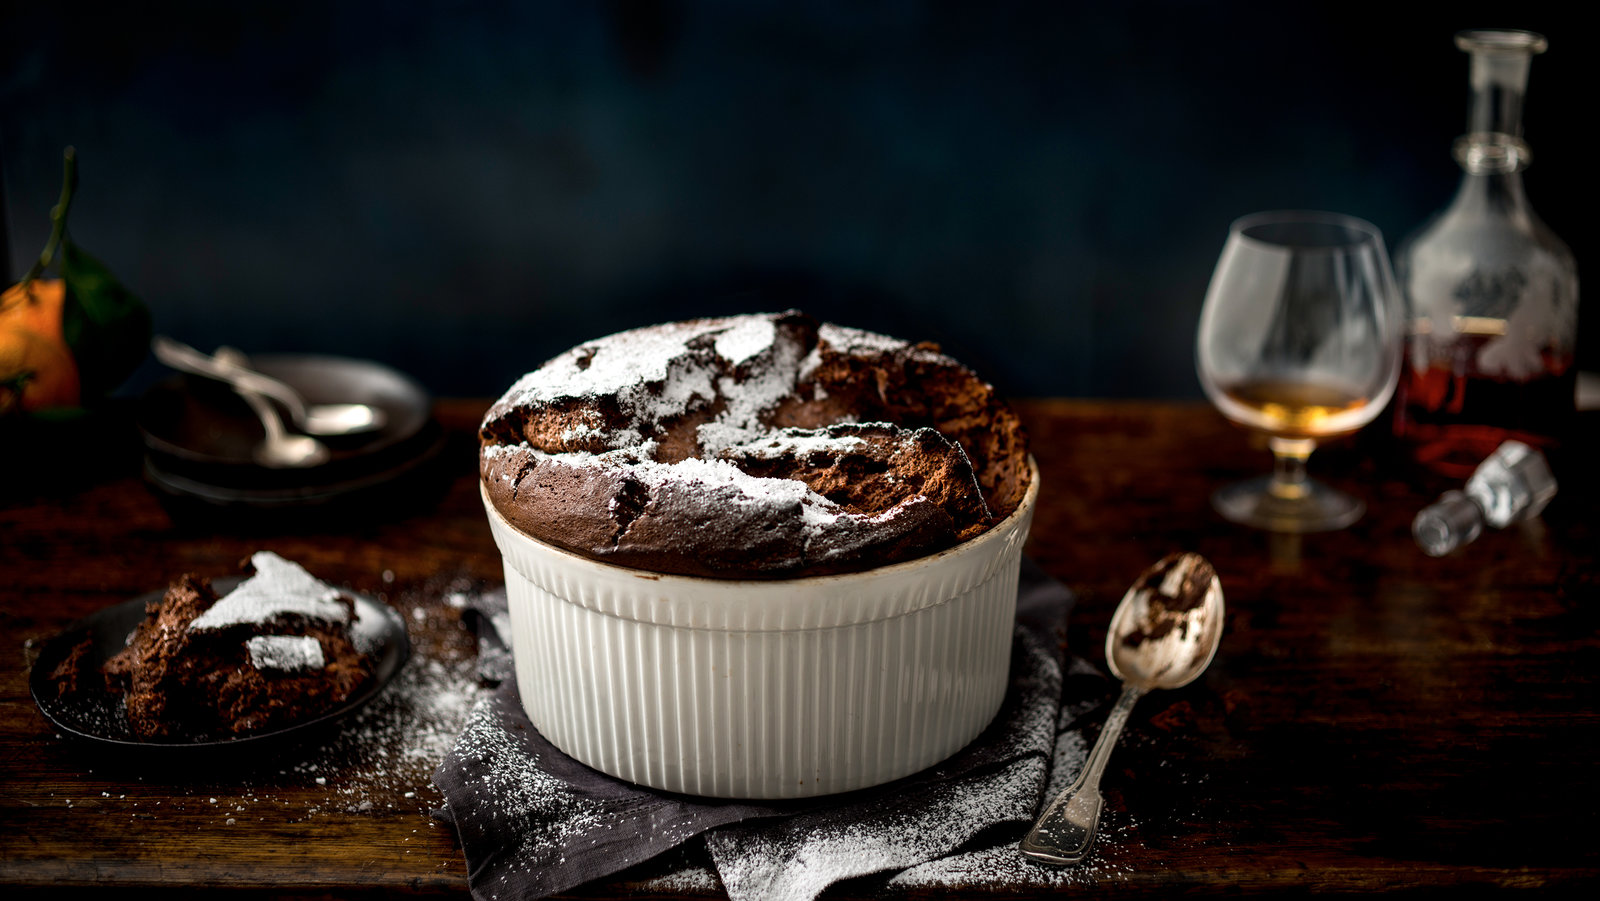 🍴 If You’ve Tried 18/27 of These Foods, You’re a Sophisticated Eater Chocolate soufflé